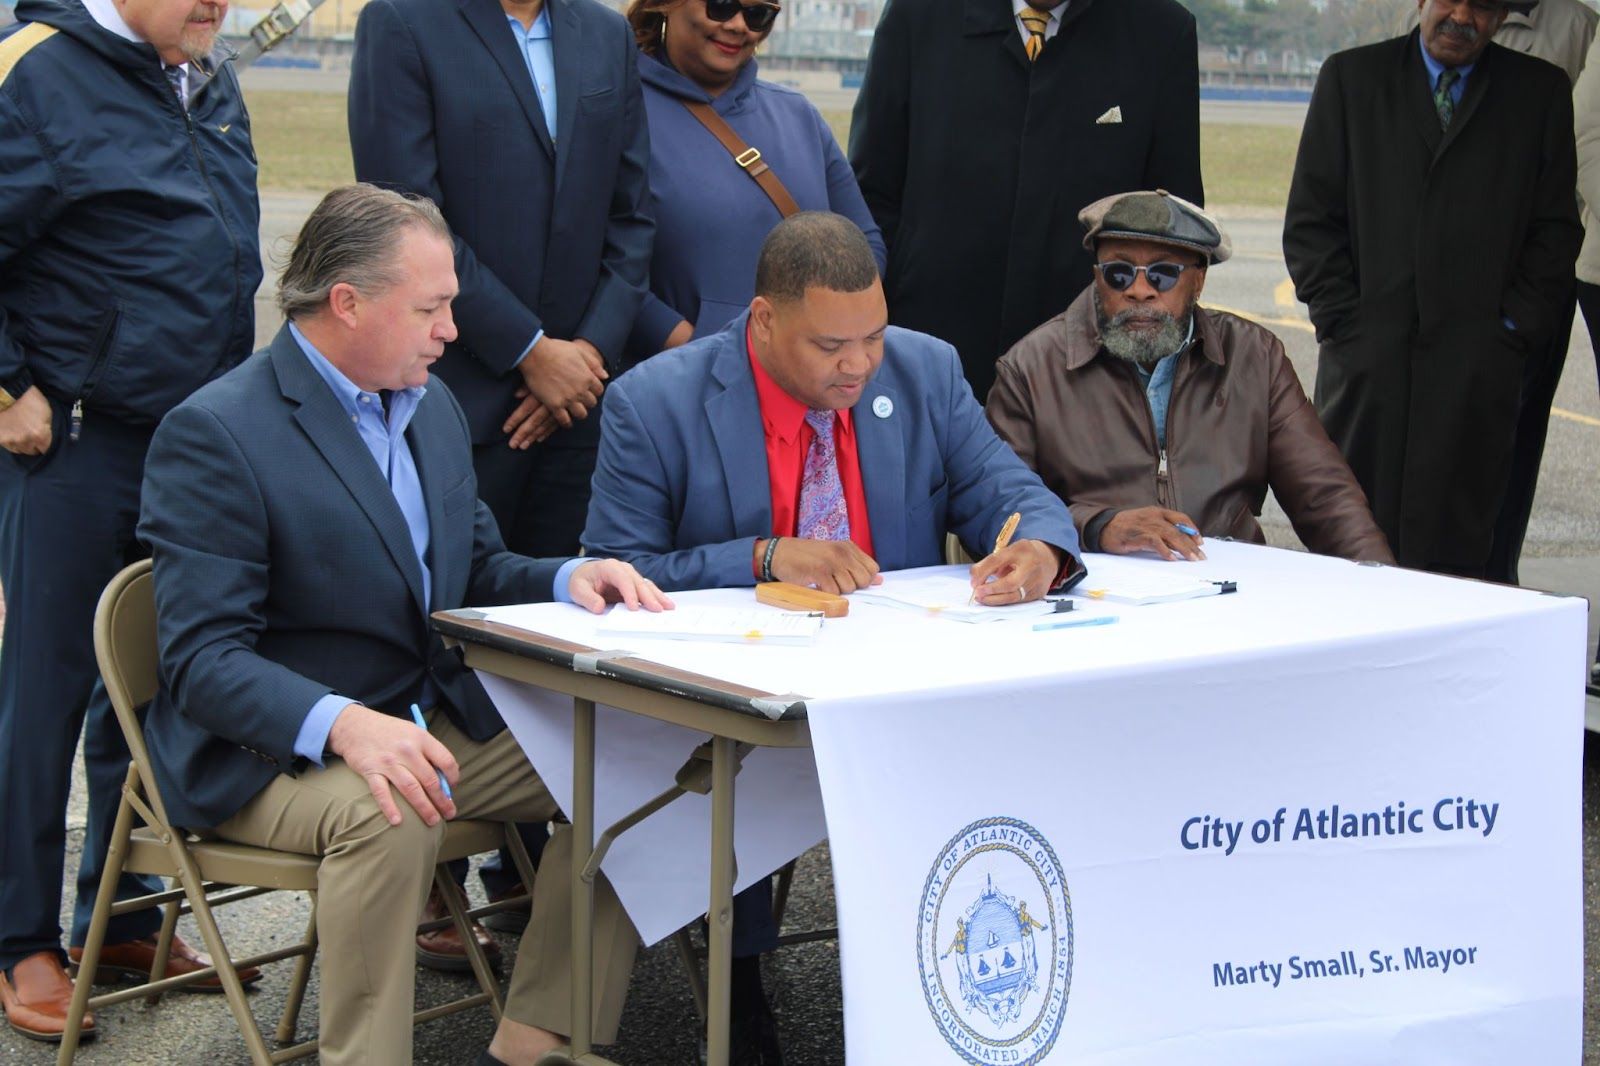 Mayor Marty Small Sr. (Center), Attorney Daniel J. Gallagher (Left) and City Council President Aaron Sporty Randolph (Right) sign MOU with DEEM Enterprises, LLC. Image Source: City of Atlantic City.